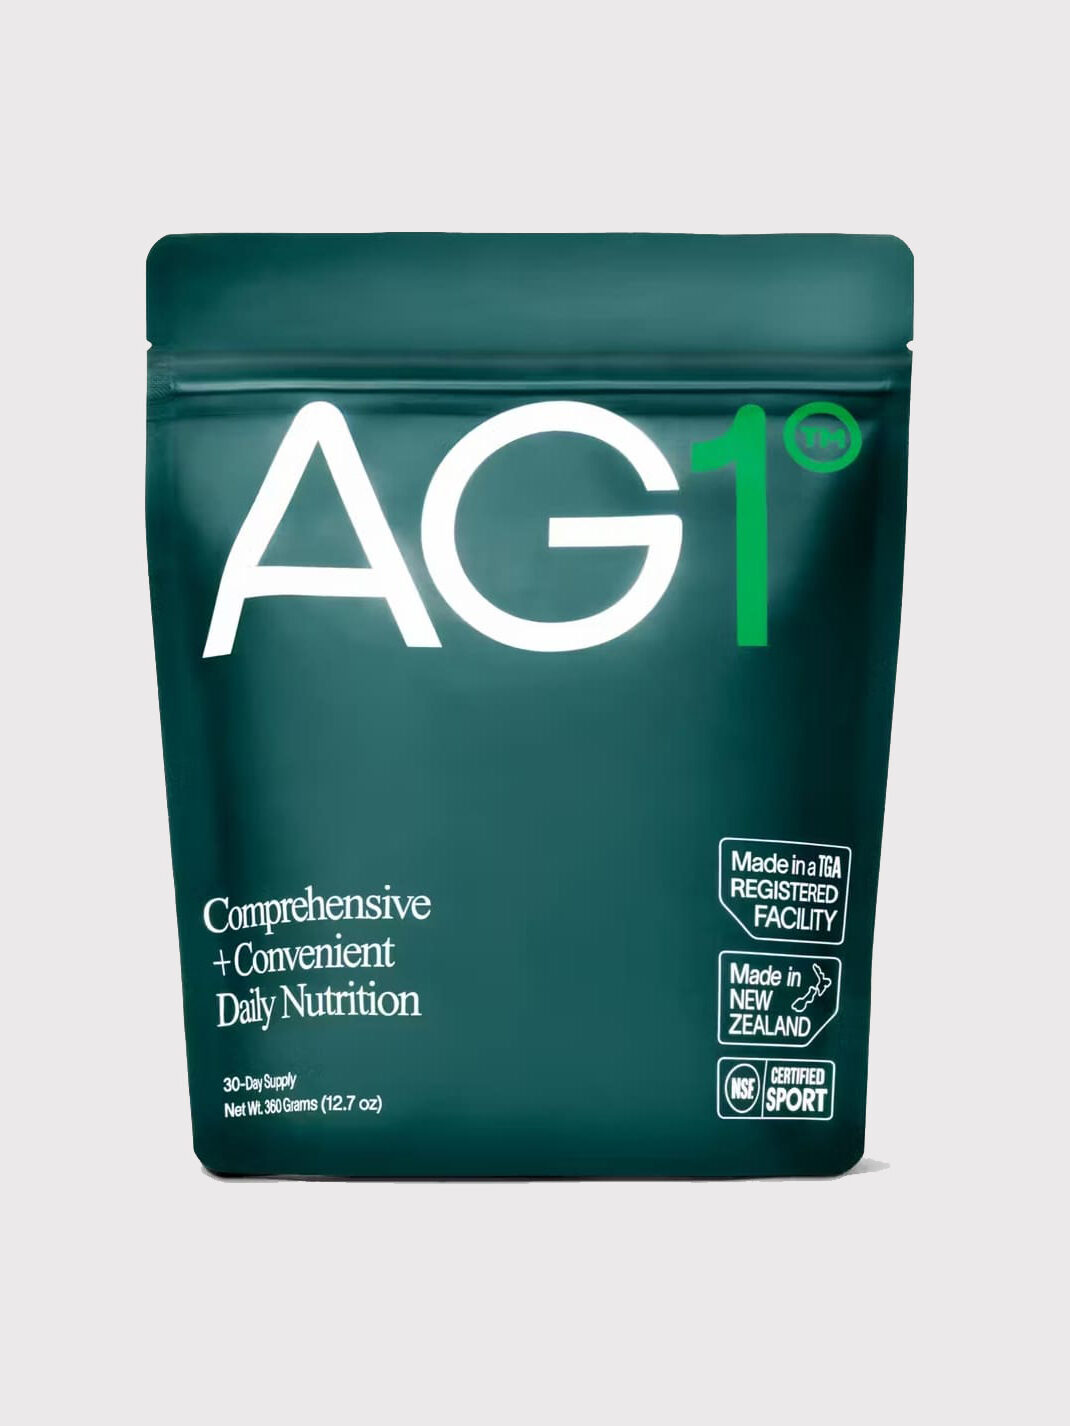 A packet of AG1.